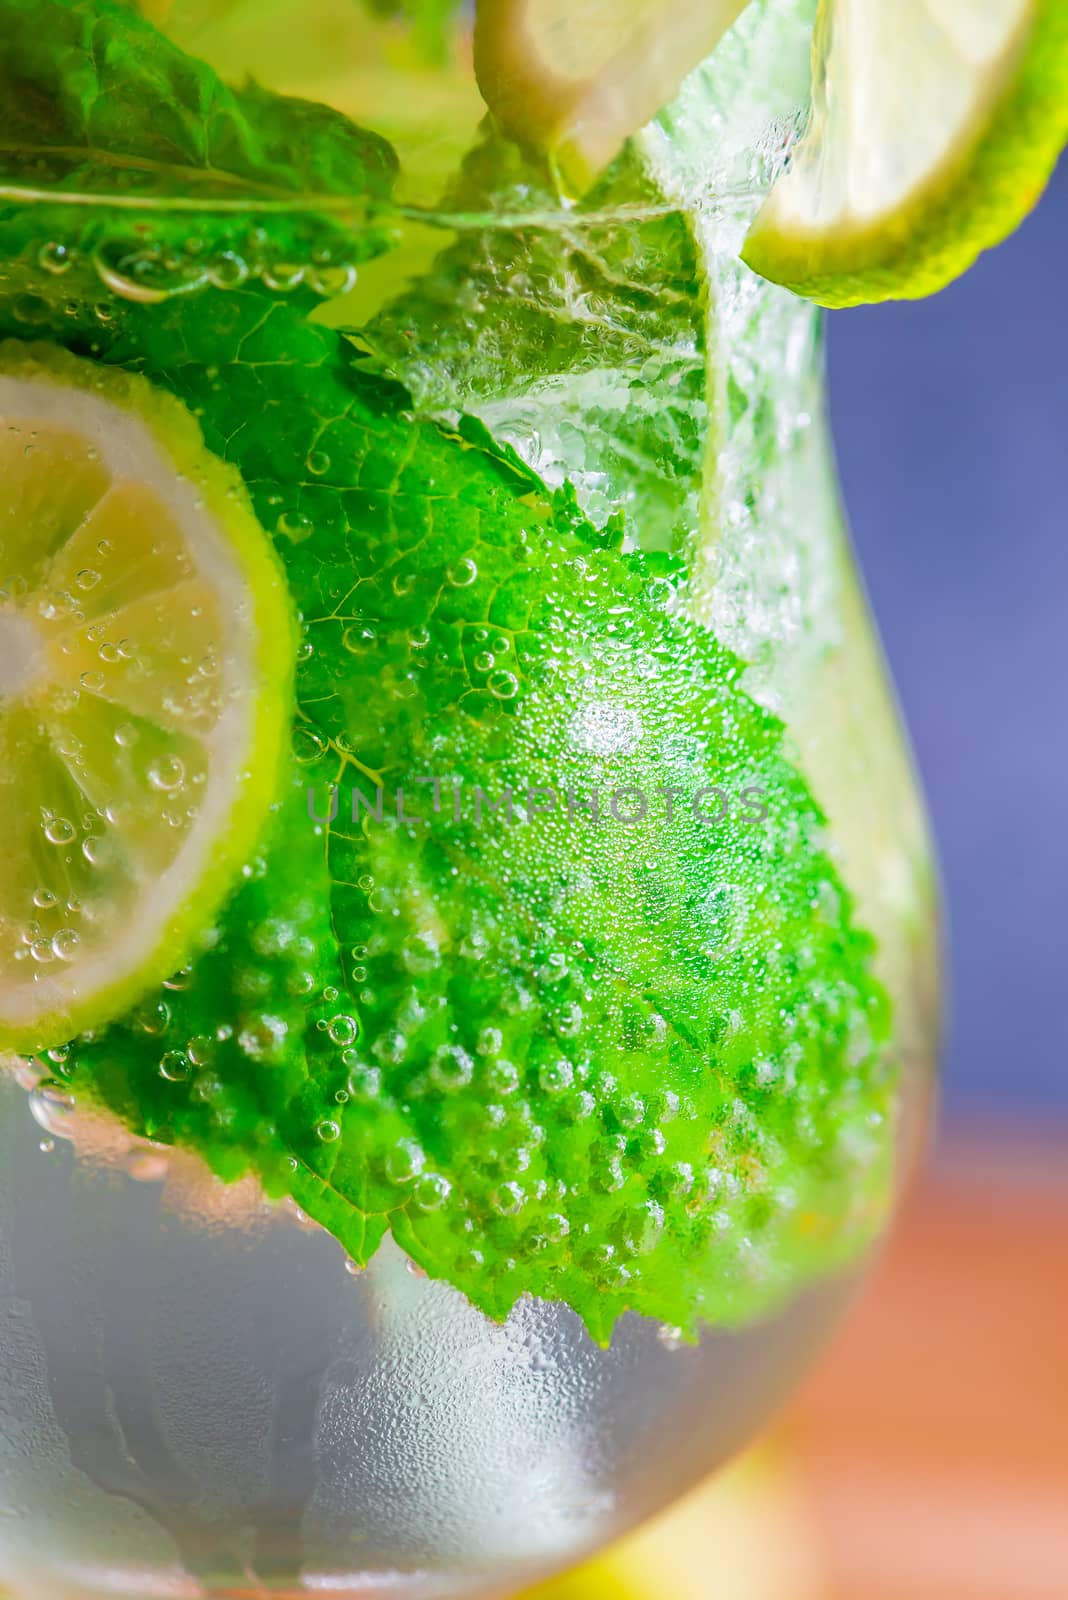 fizzy cold mojito cocktail in a glass closeup by kosmsos111